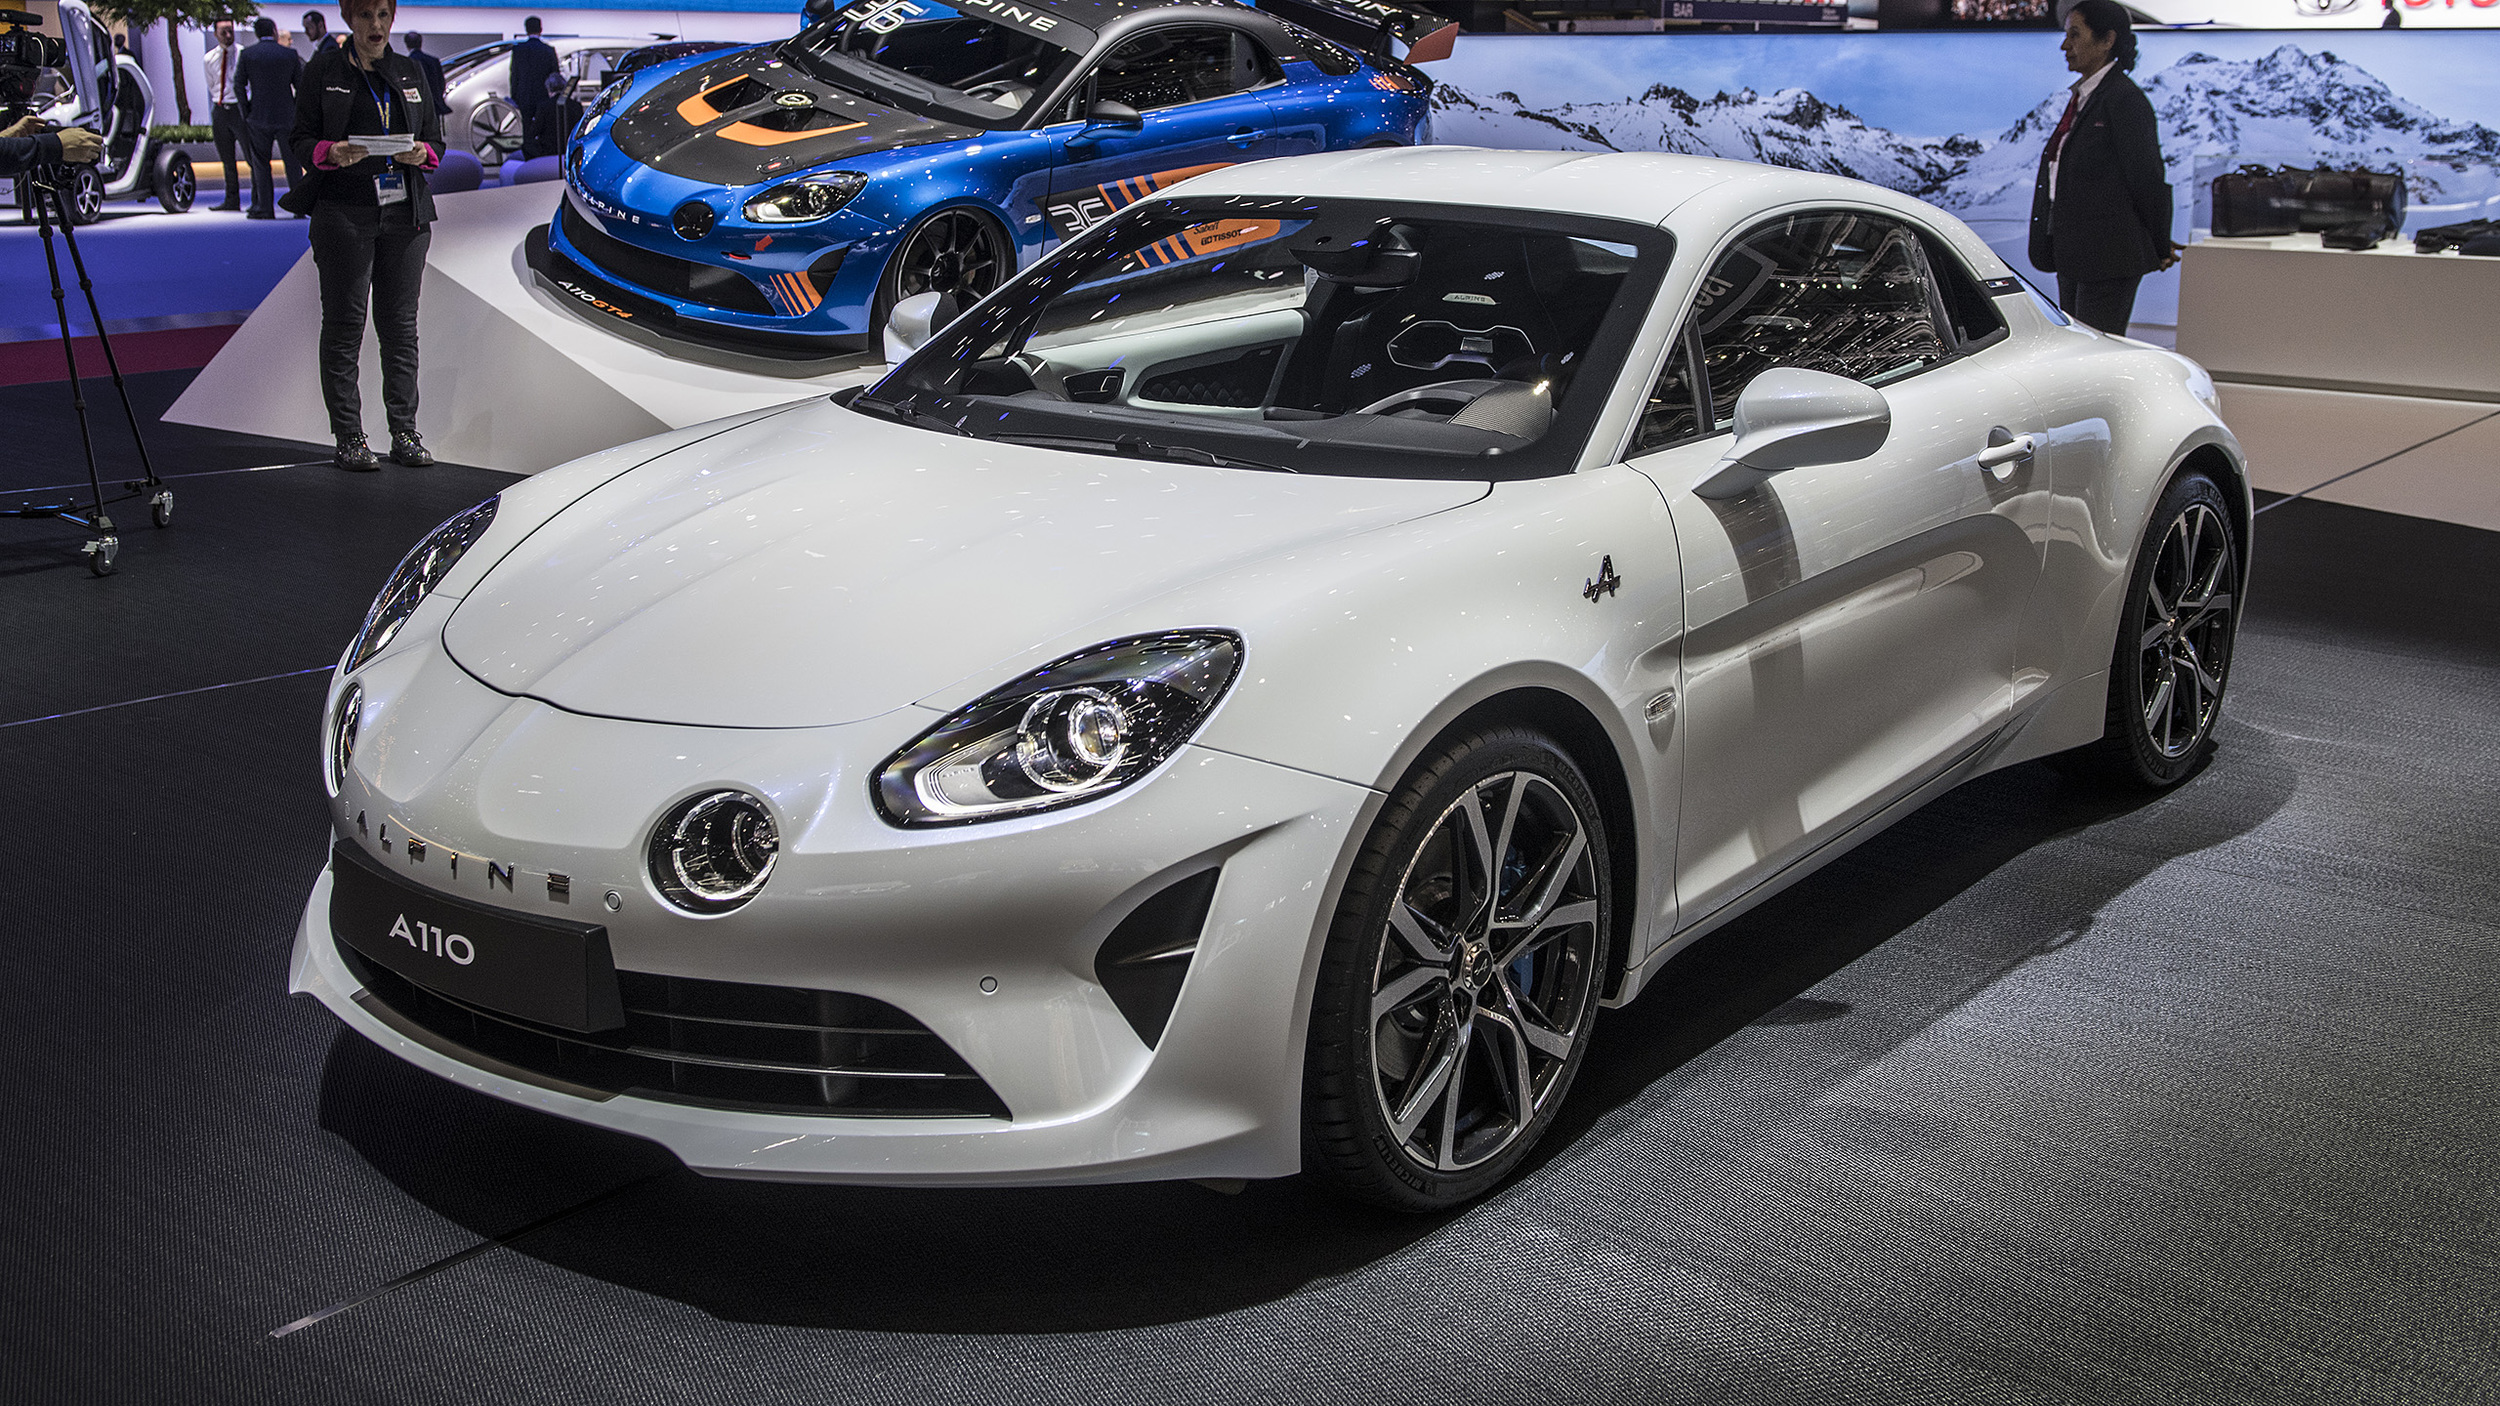 Alpine A110 updated with new trim levels, colors, wheels - Autoblog